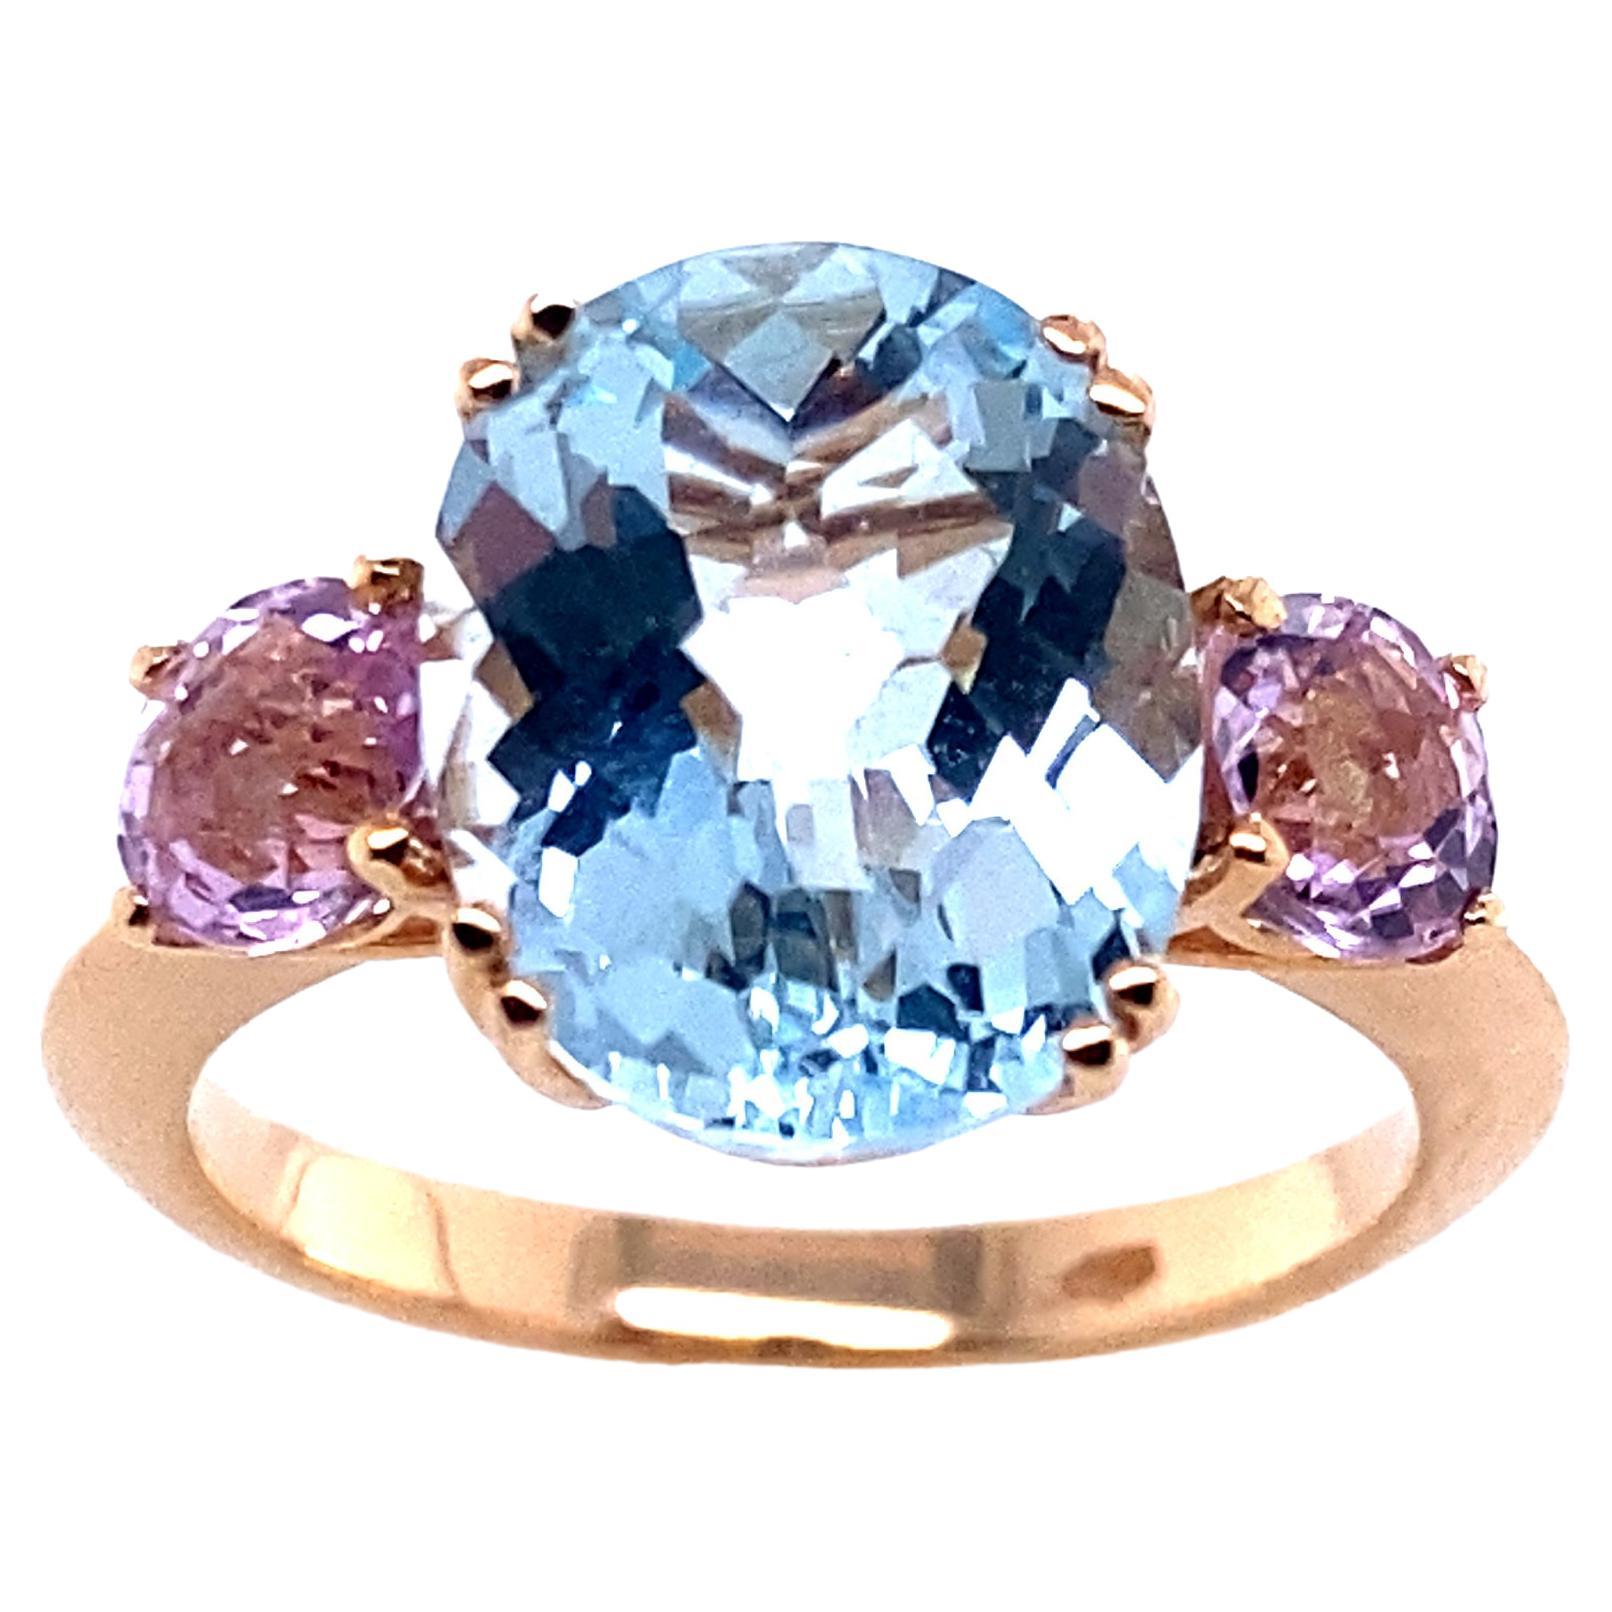 Yellow Gold Ring Surmounted by an Oval Topaz Accompanied by Two Kunzites